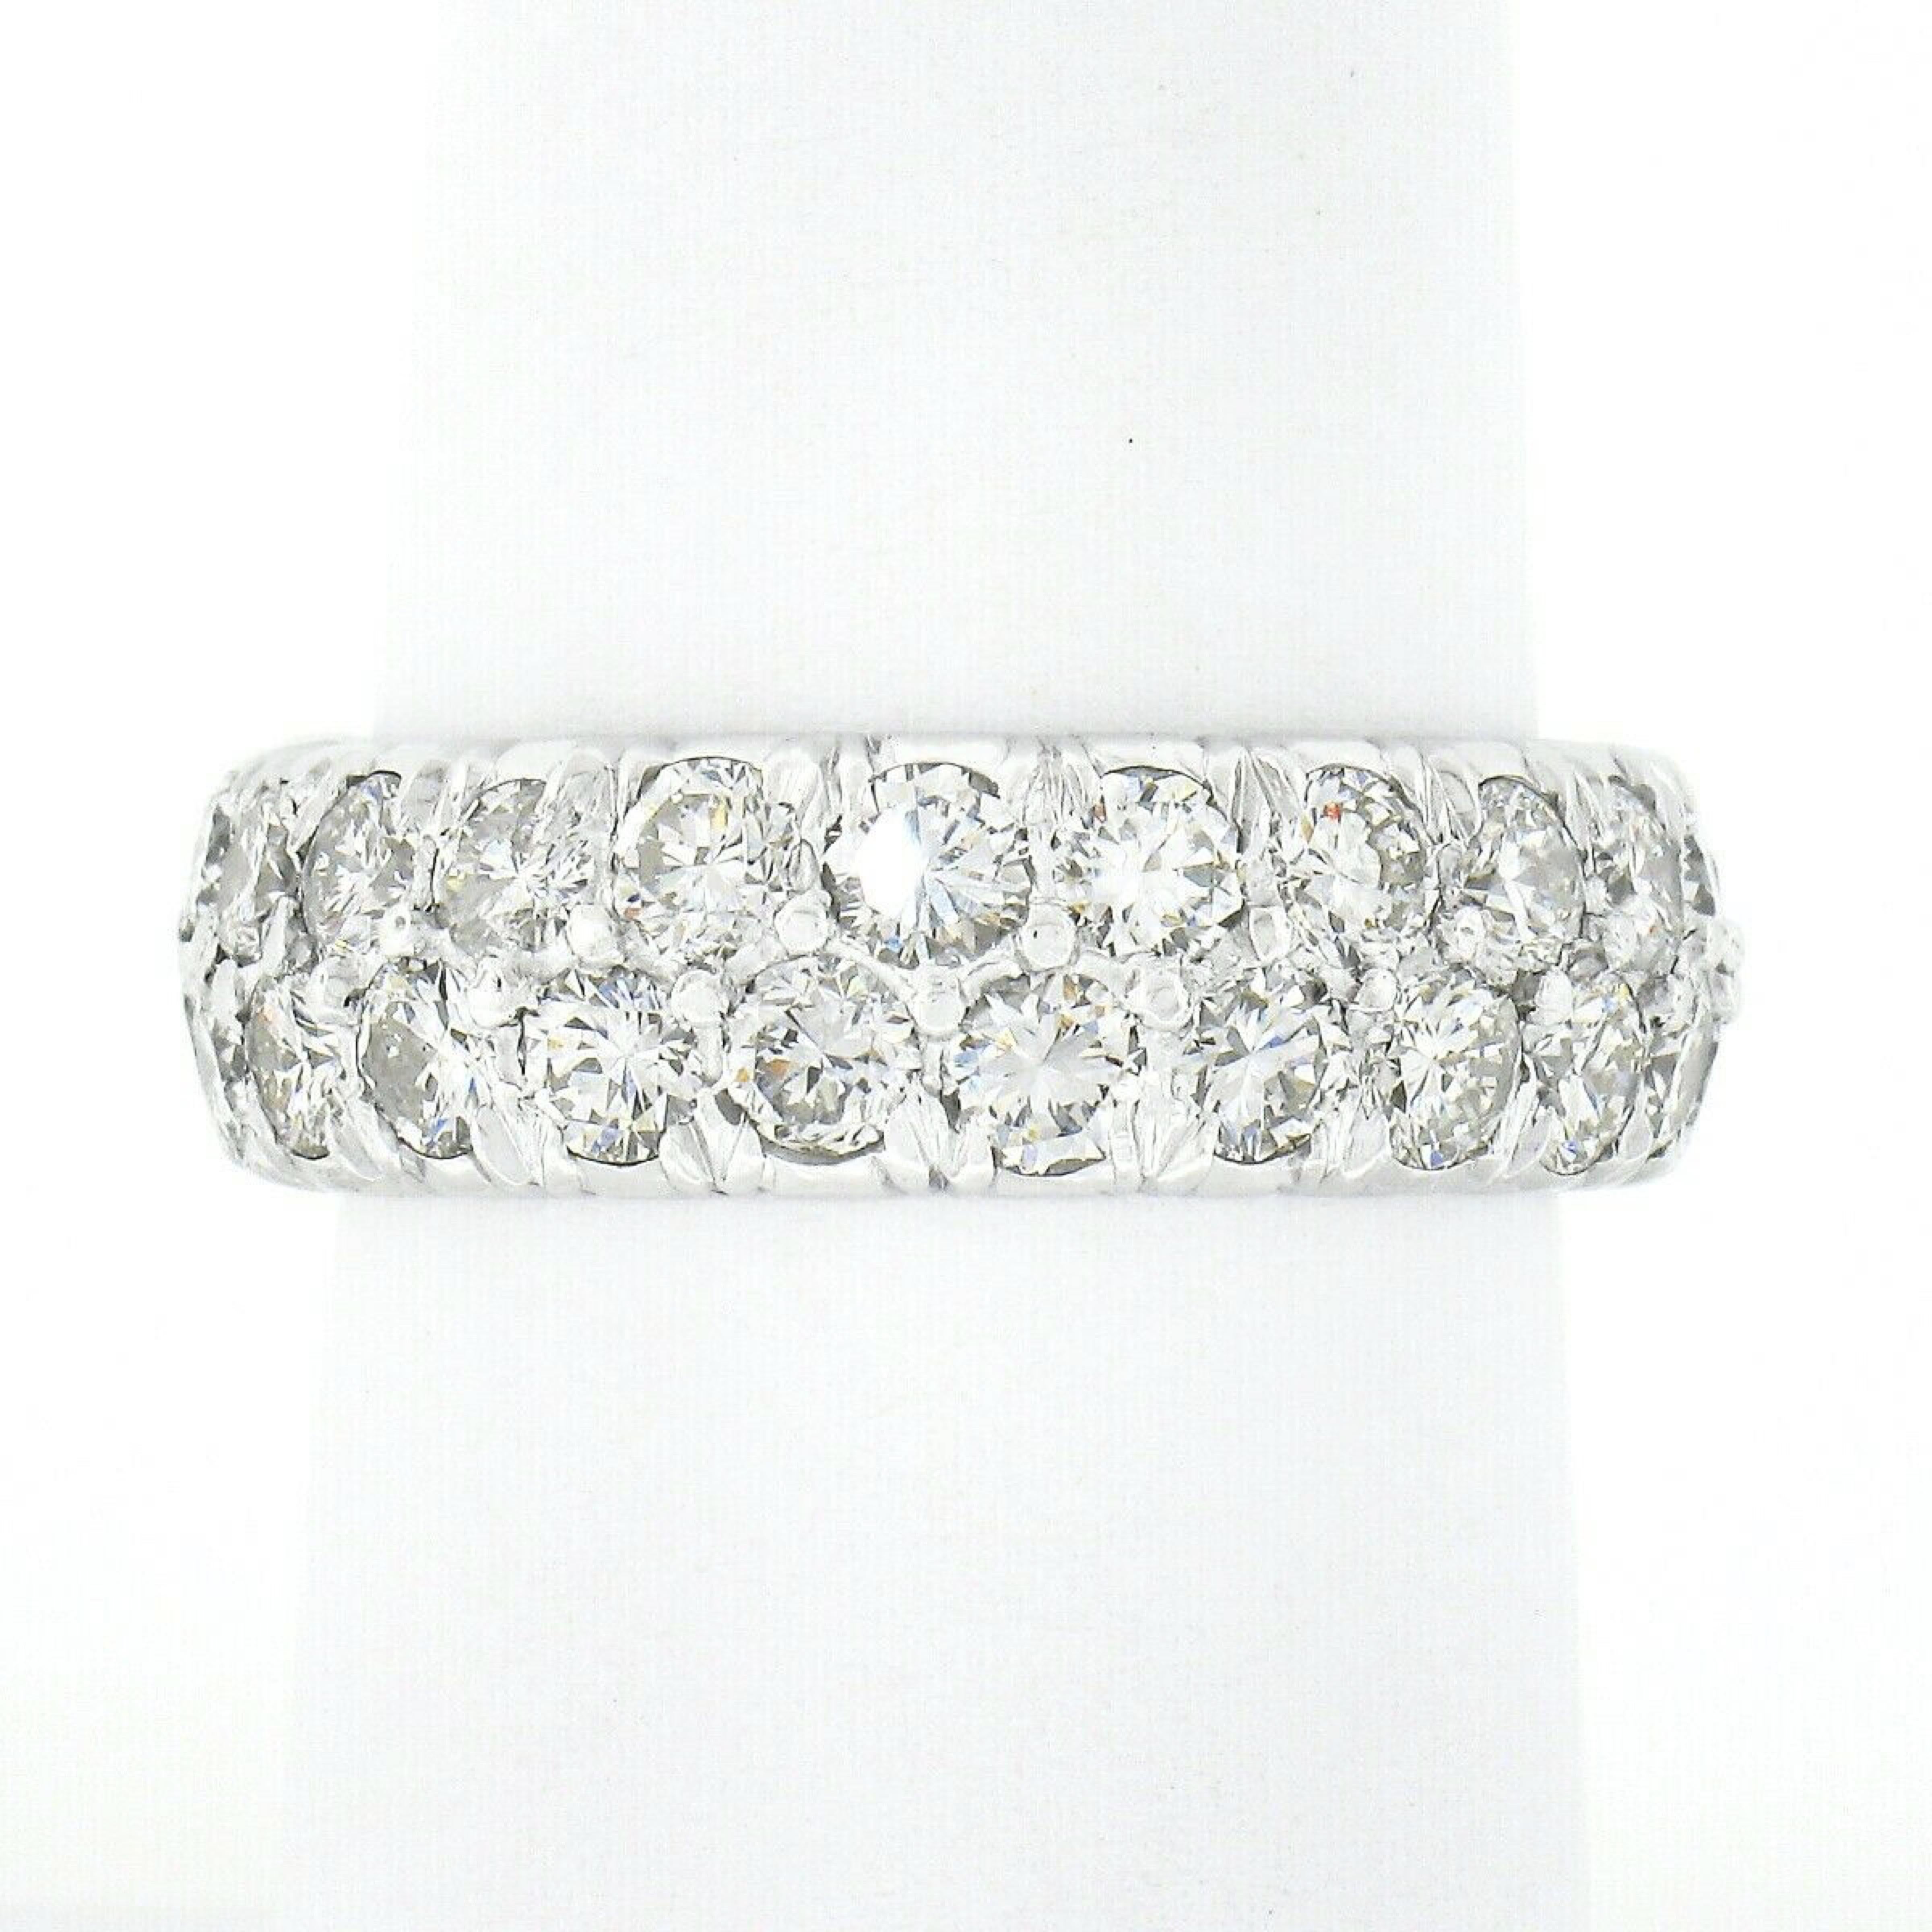 This here is a classic and elegant vintage diamond eternity band crafted in solid platinum. The ring features approximately 3.50 carats of top quality round brilliant cut diamonds that are true hand pave set throughout the entire band in a dual row